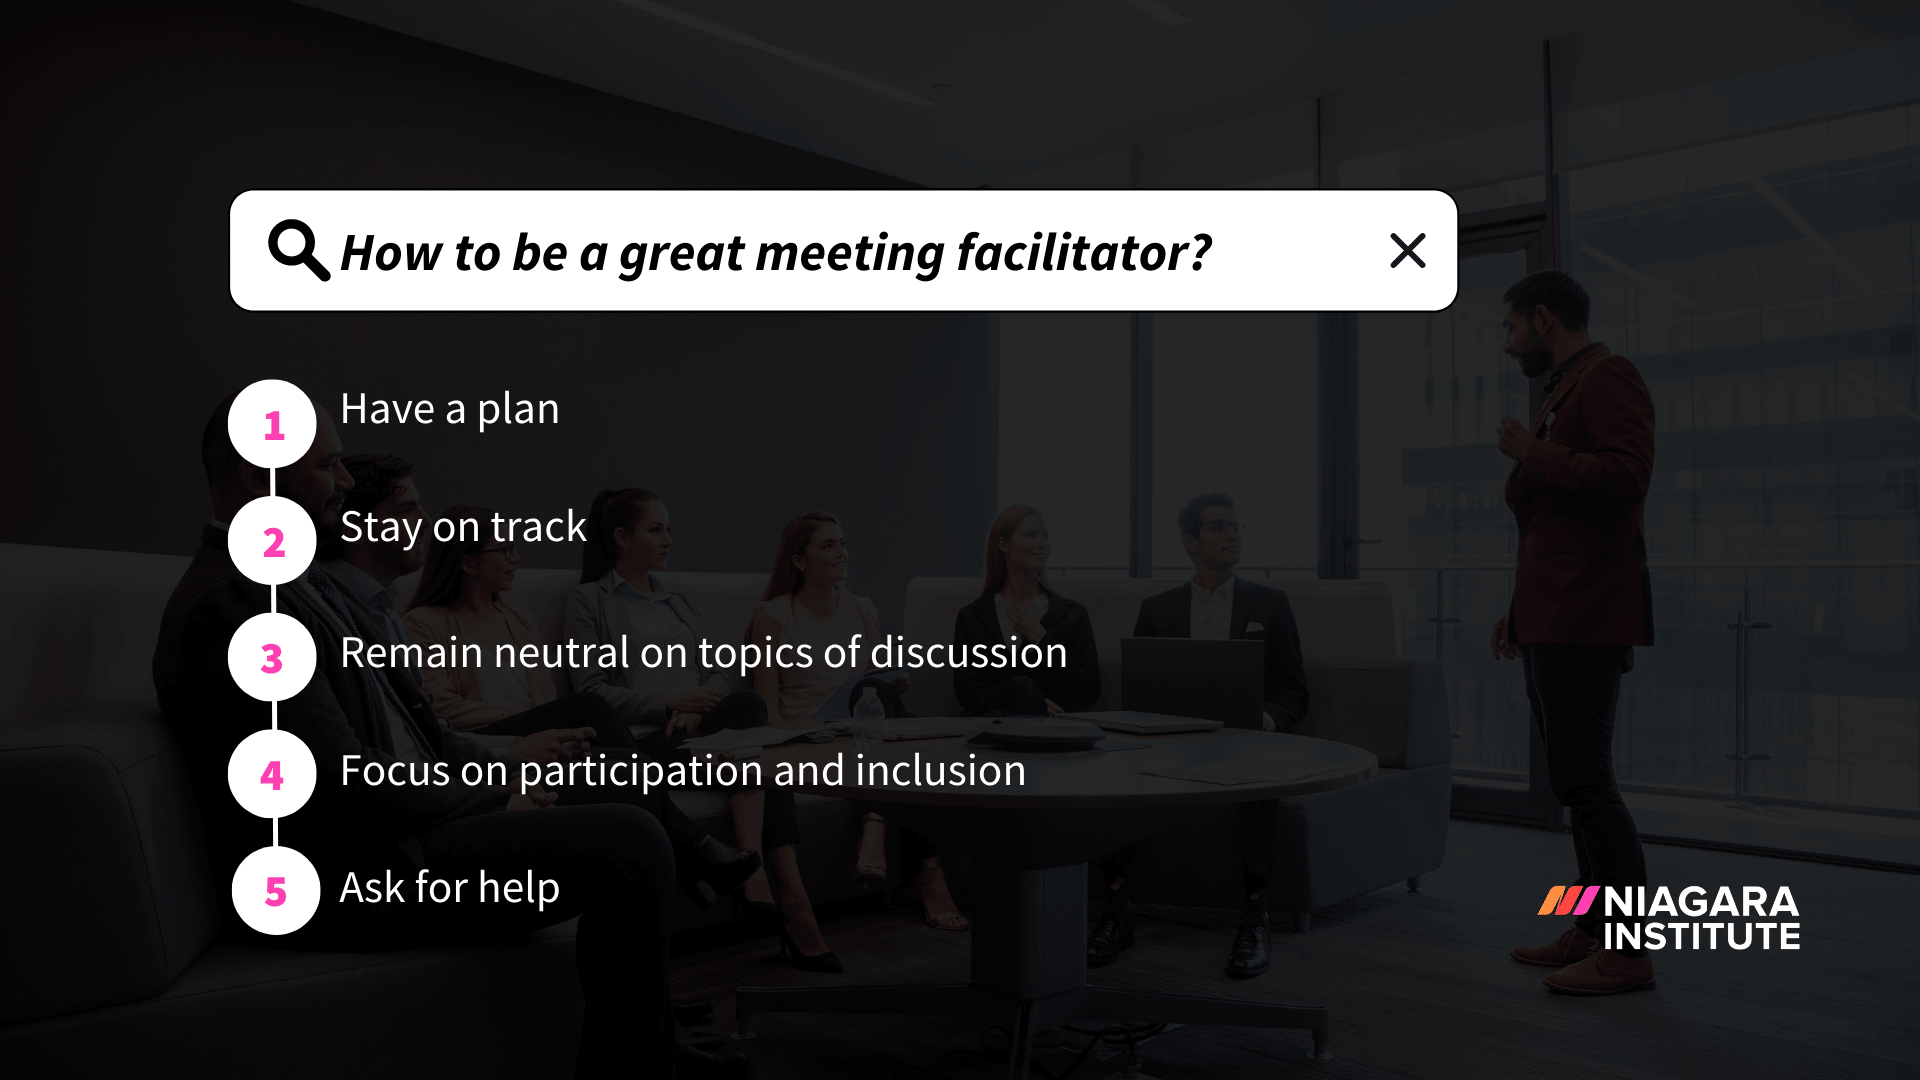 How To Be a Great Meeting Facilitator - Niagara Institute (1)